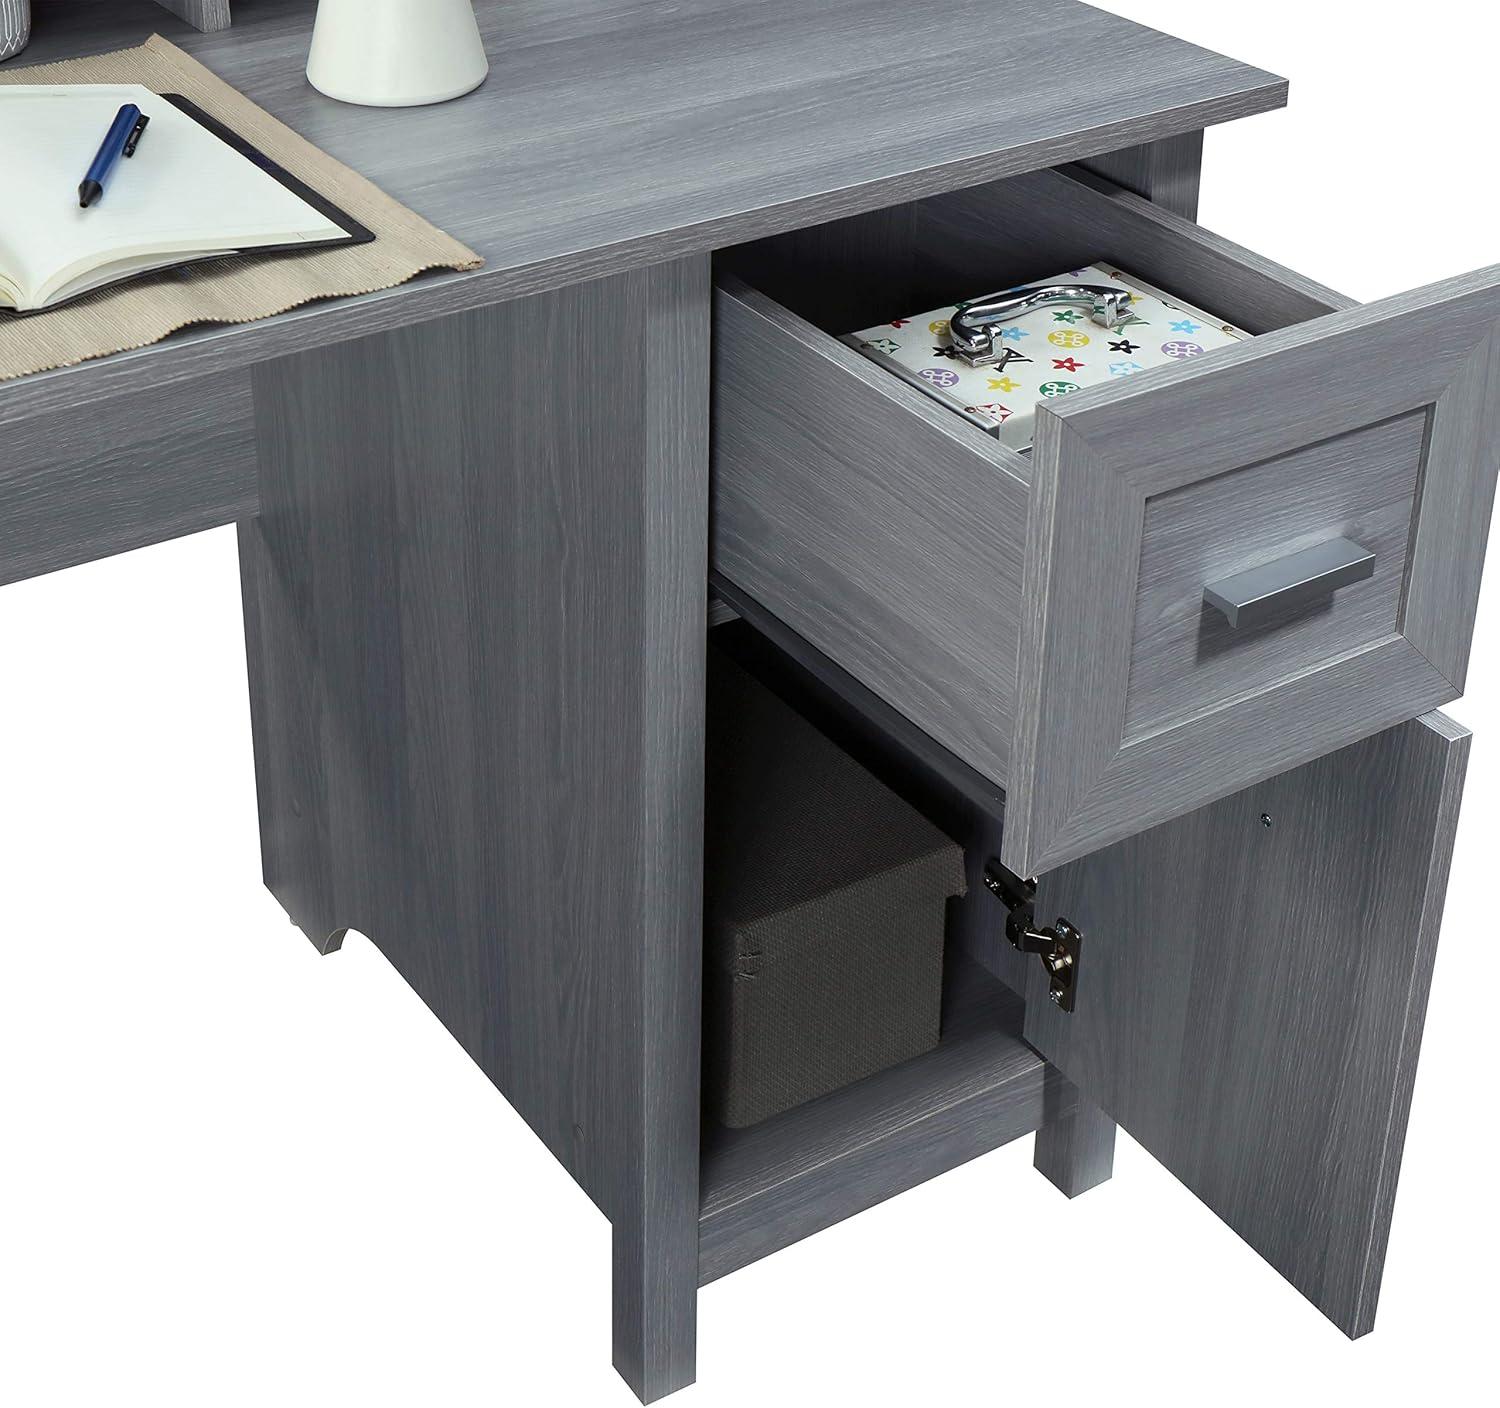 Modern Gray Wood-Design Office Desk with Hutch and Drawers